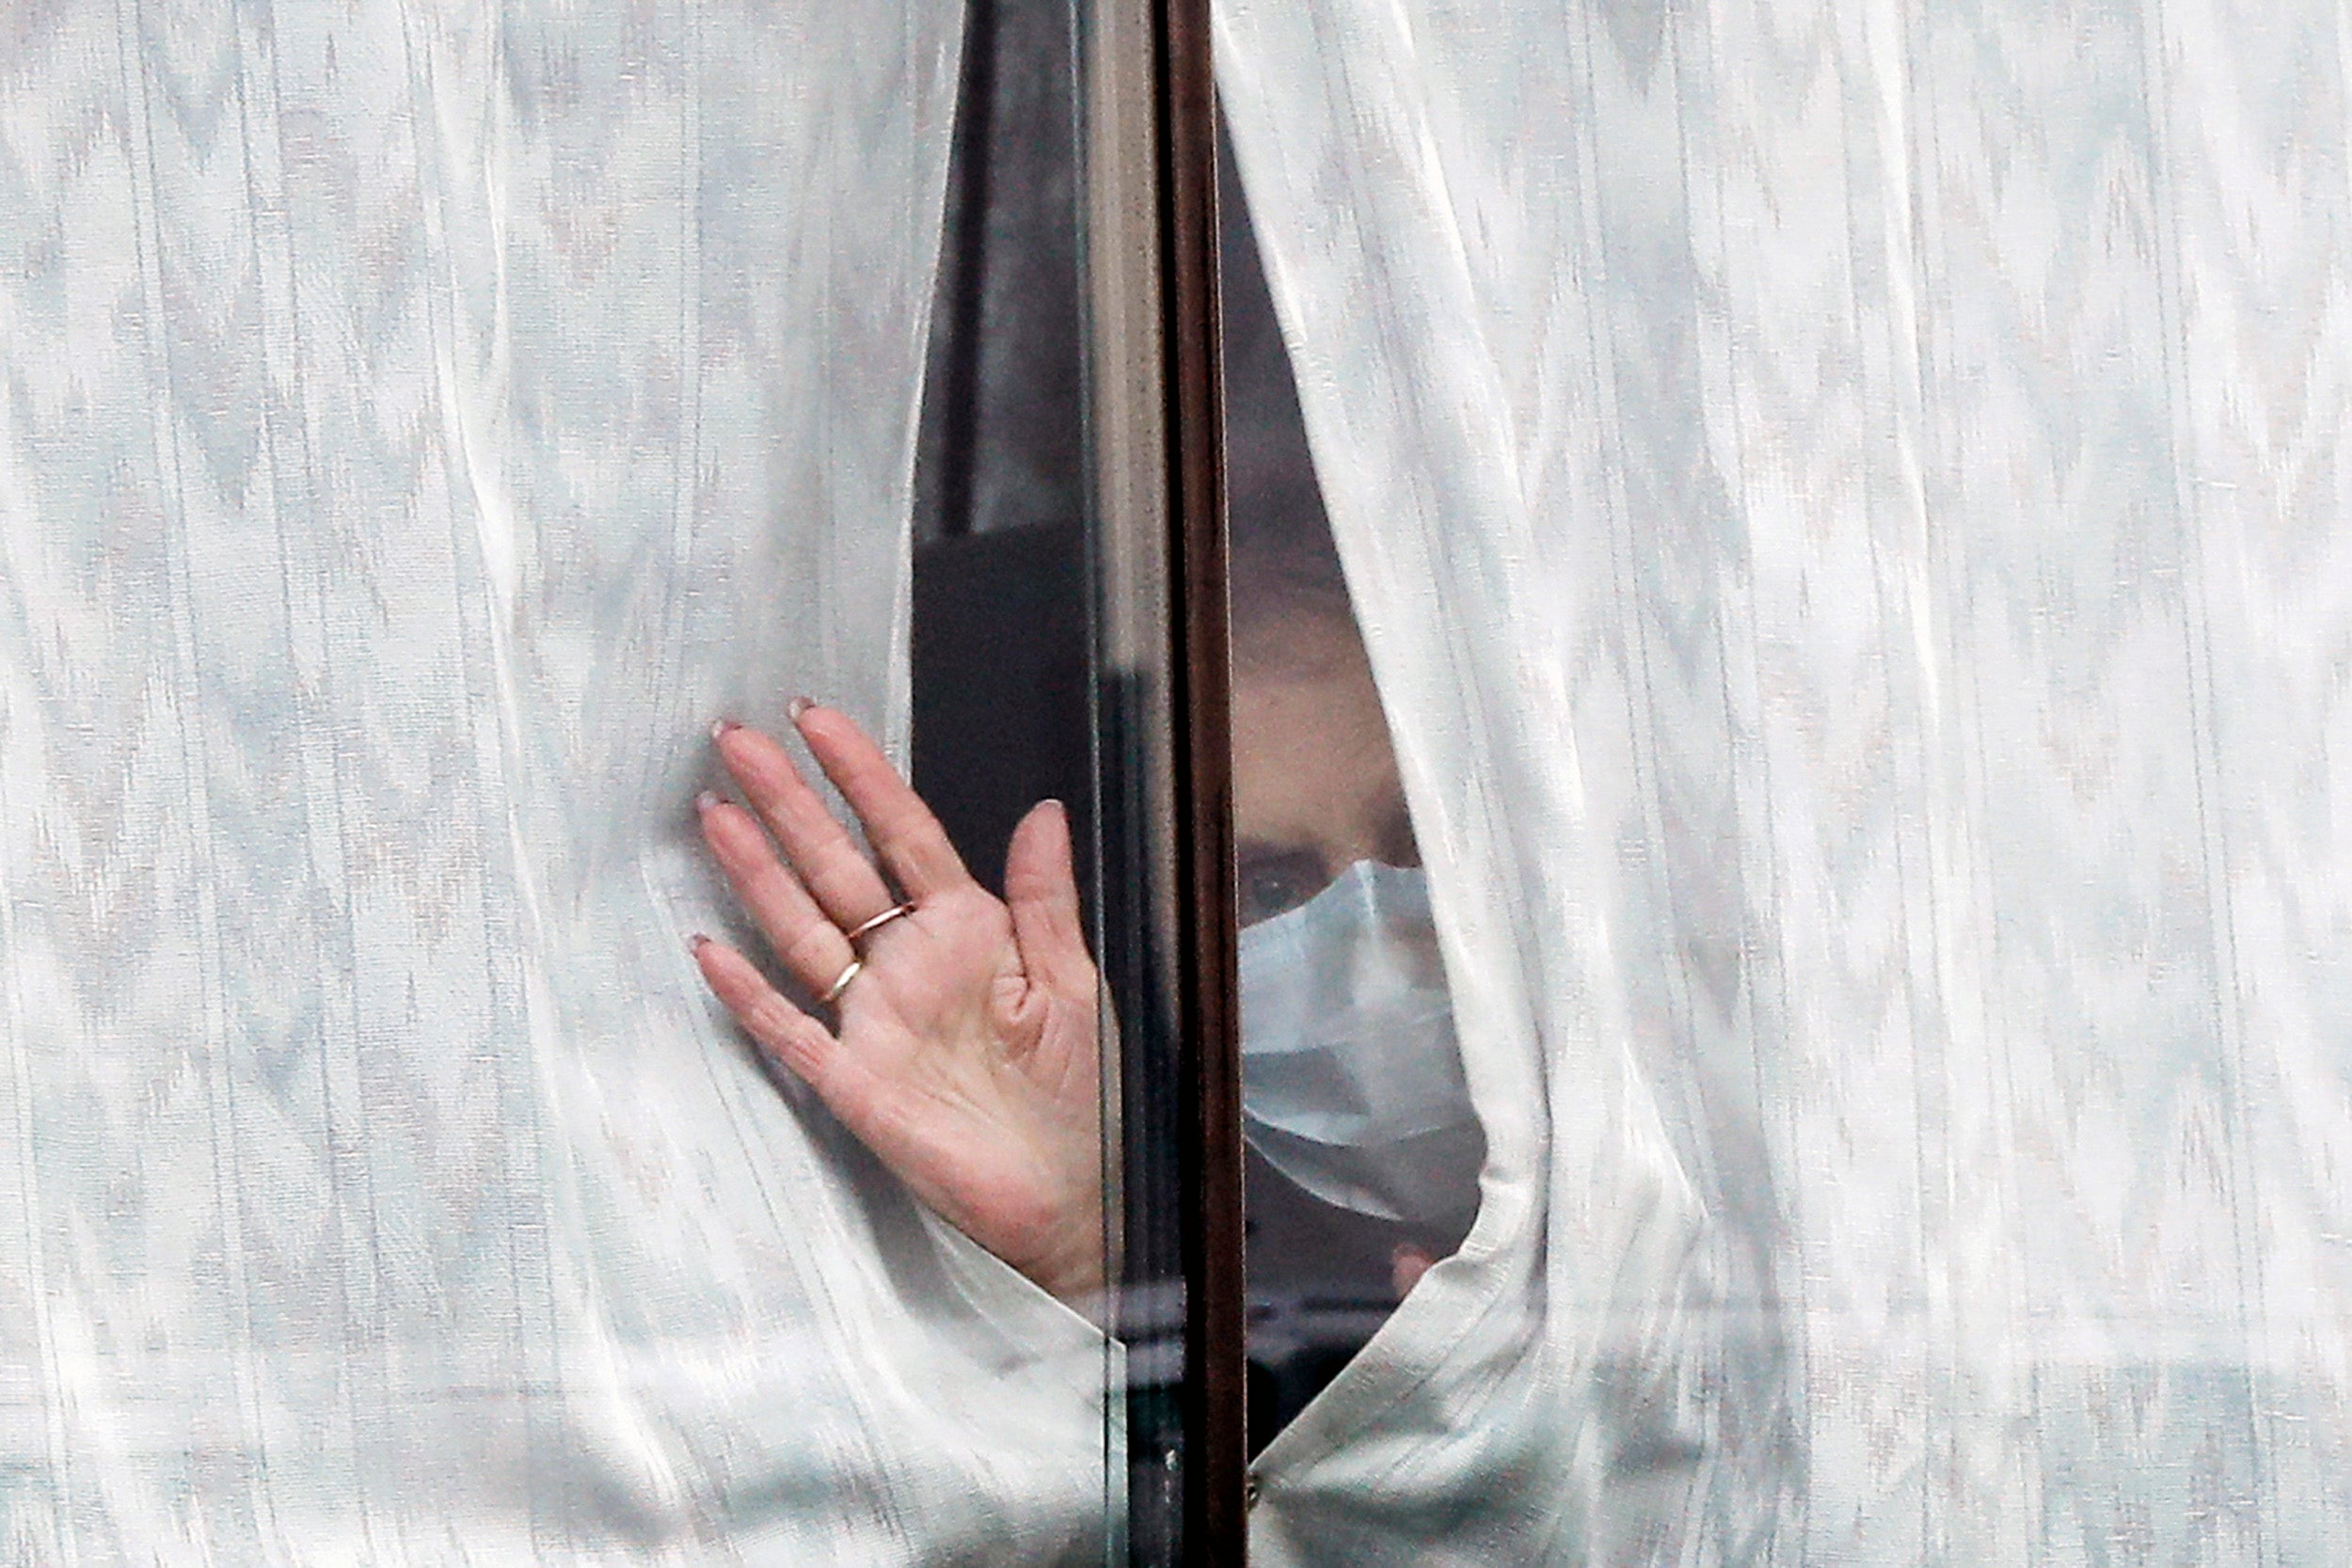 A woman waves from a window.